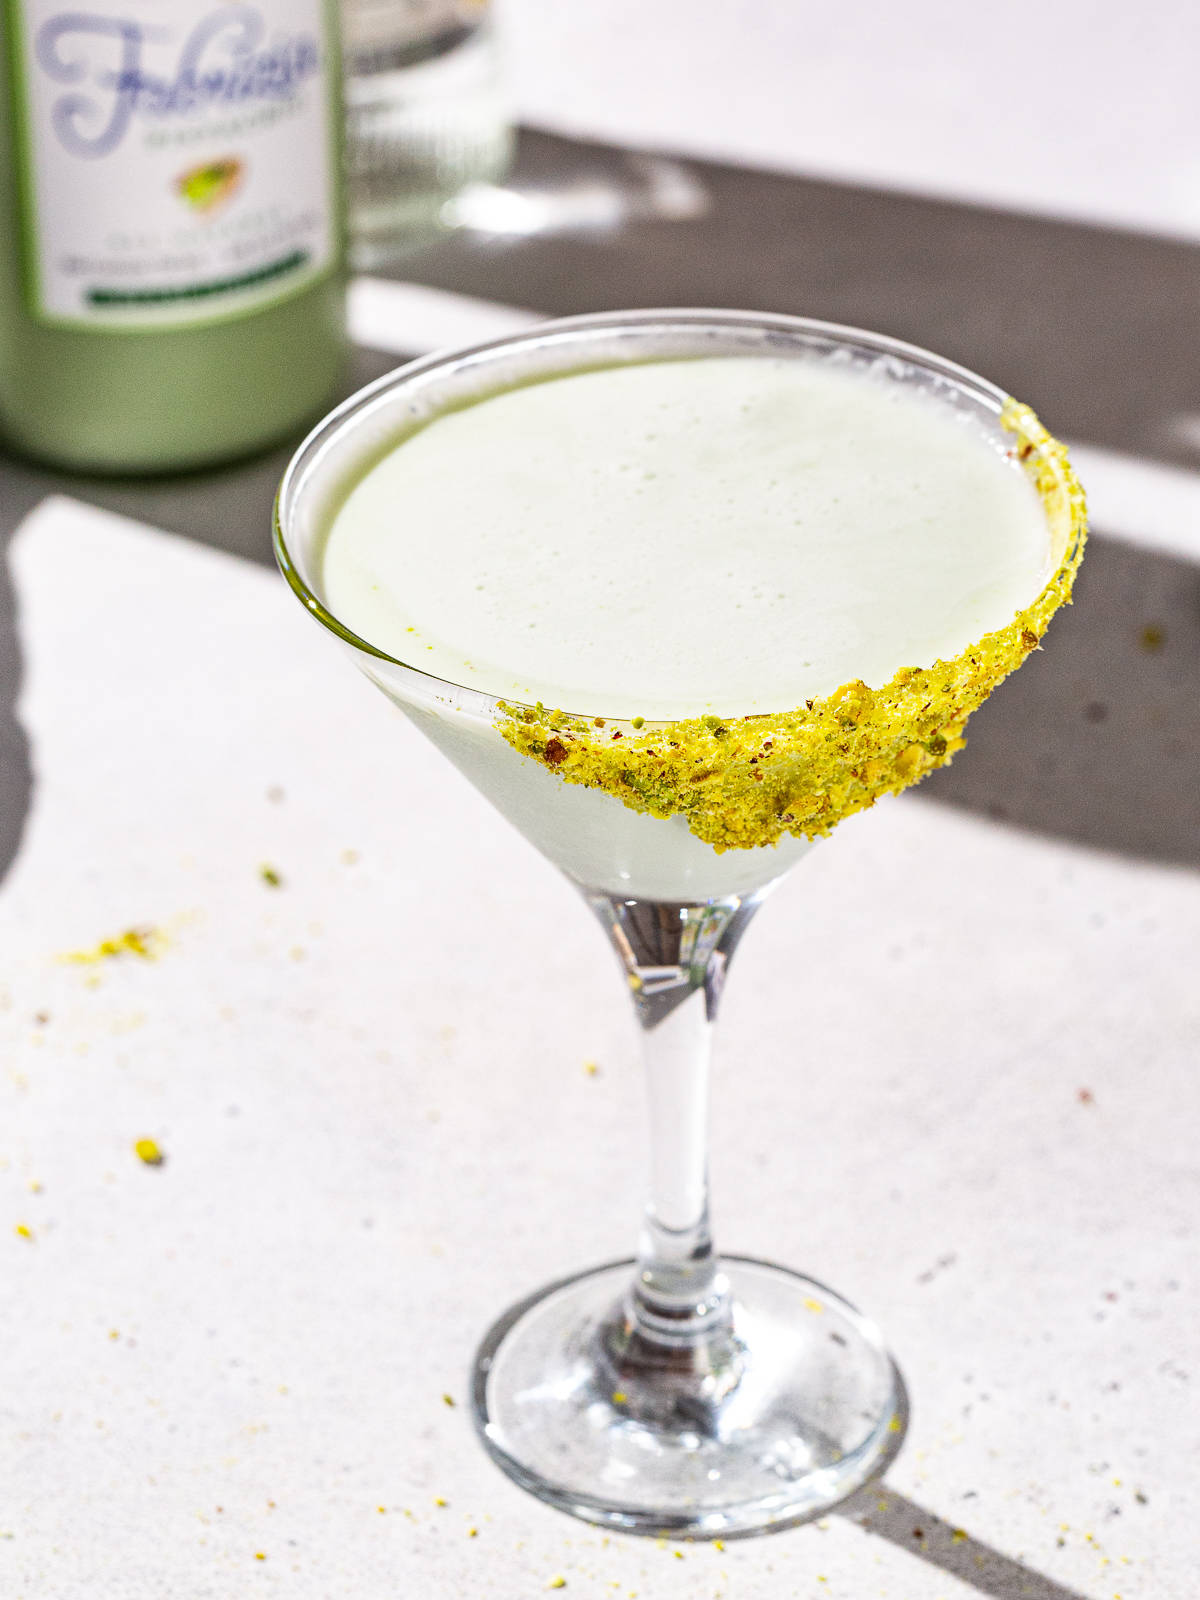 Overhead view of a pale green colored Pistachio Martini in a martini glass. In the background is a bottle of pistachio liqueur.